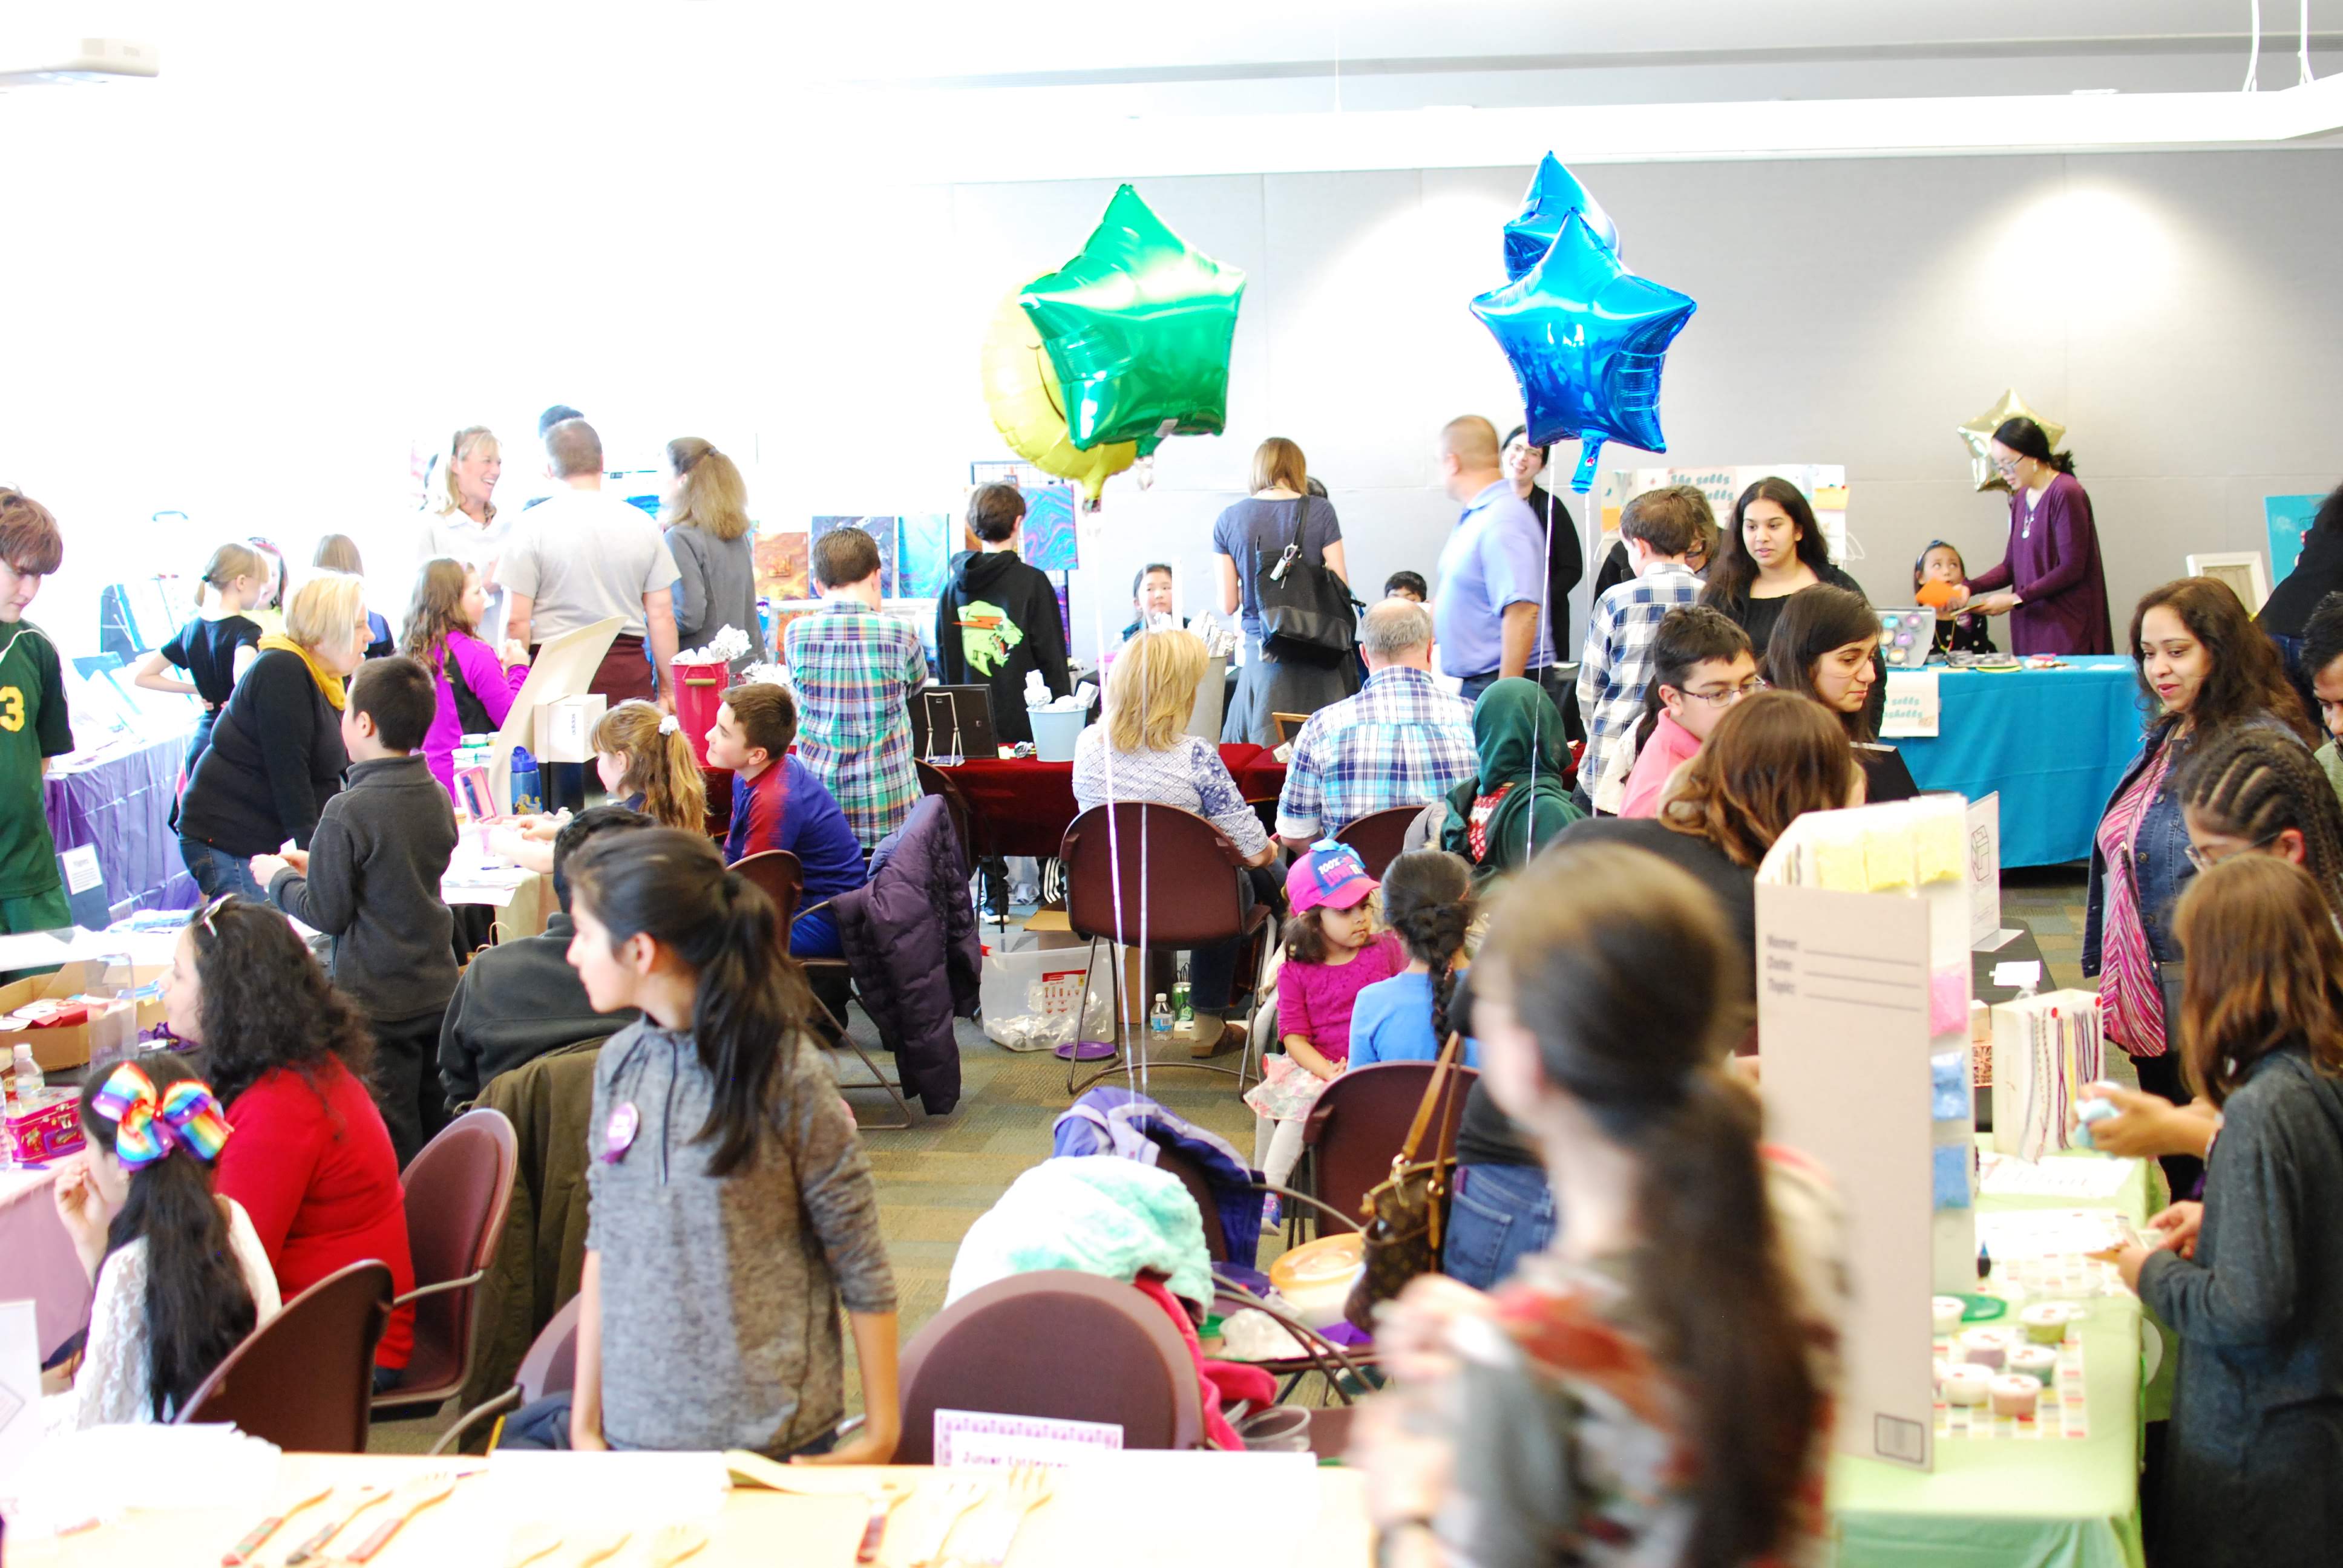 Photo of the meeting room filled with sales booths, kids, shoppers and balloons